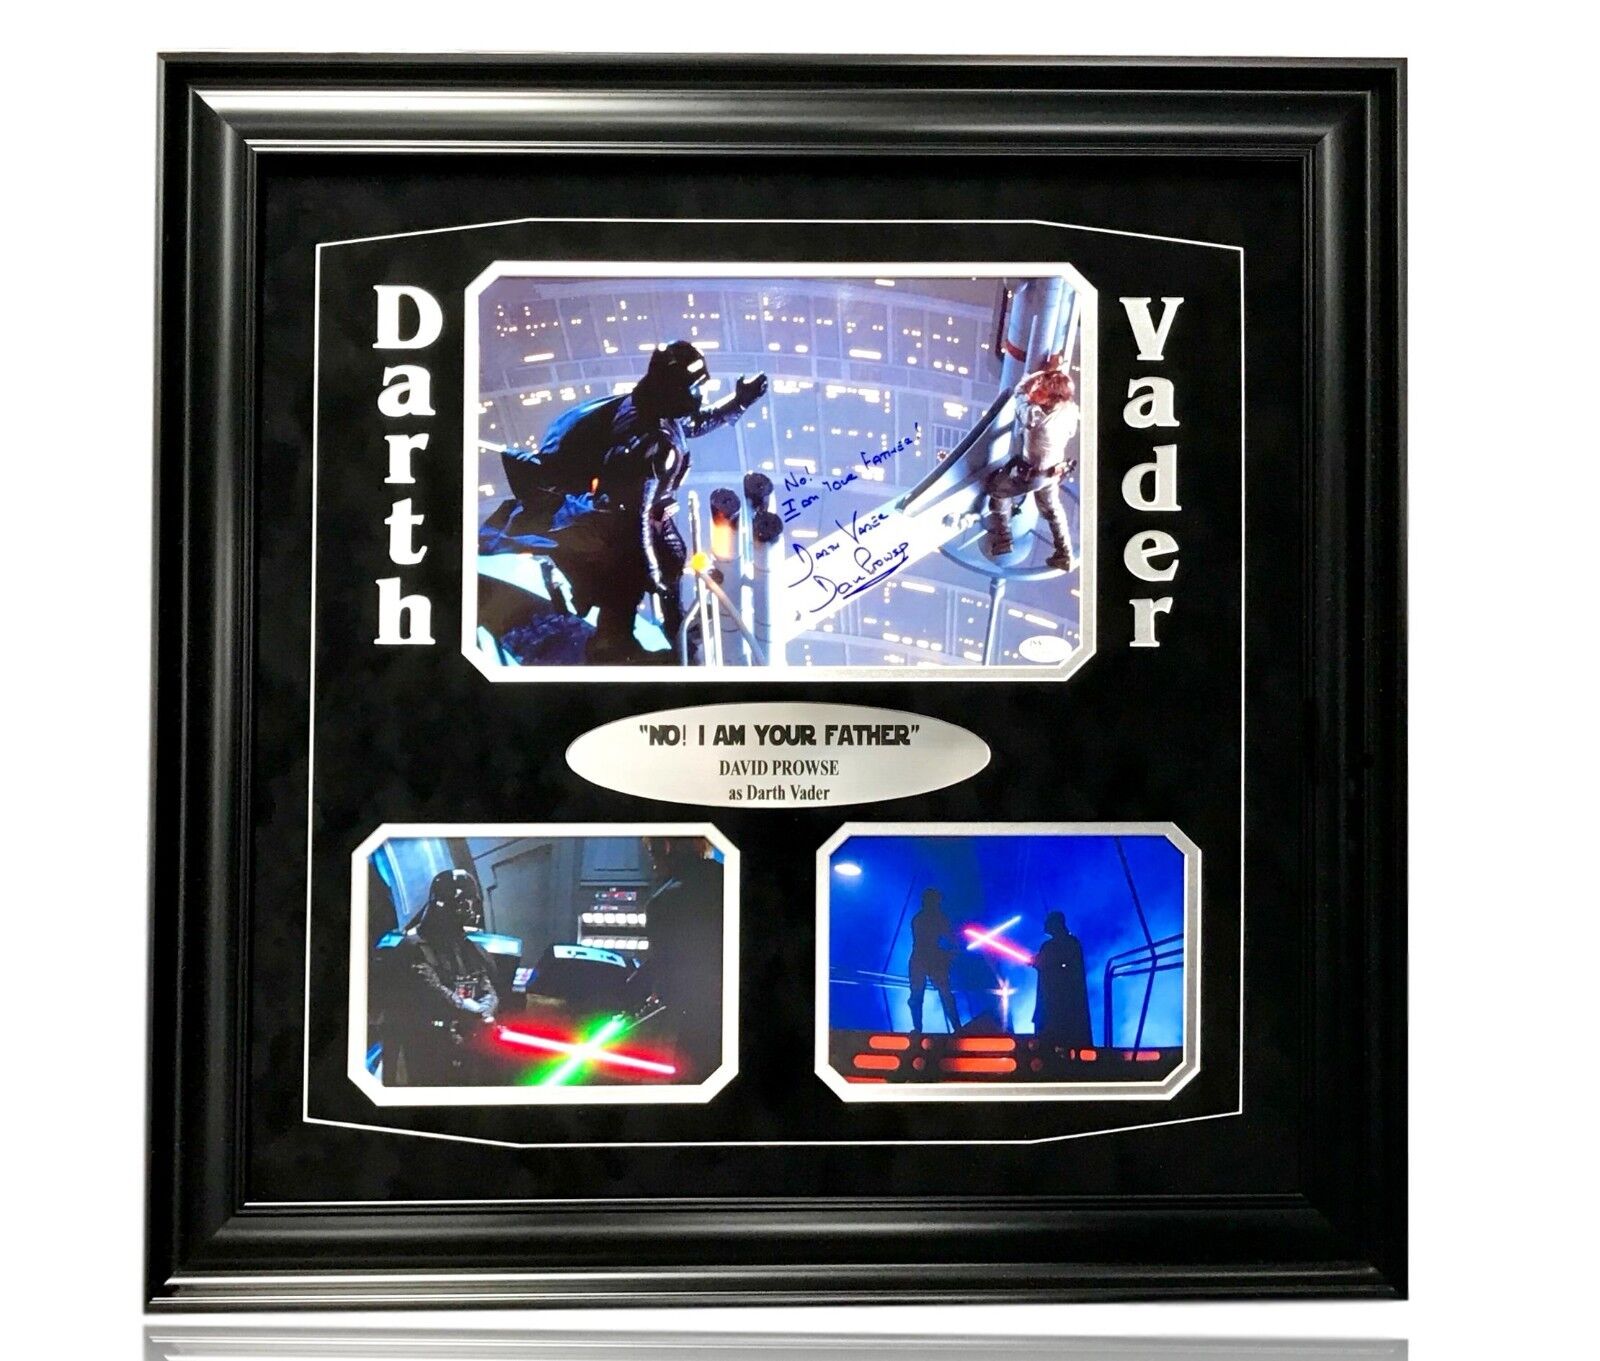 David Prowse Signed Photo Poster painting Inscribed Framed JSA Autograph Darth Vader 8x Dave